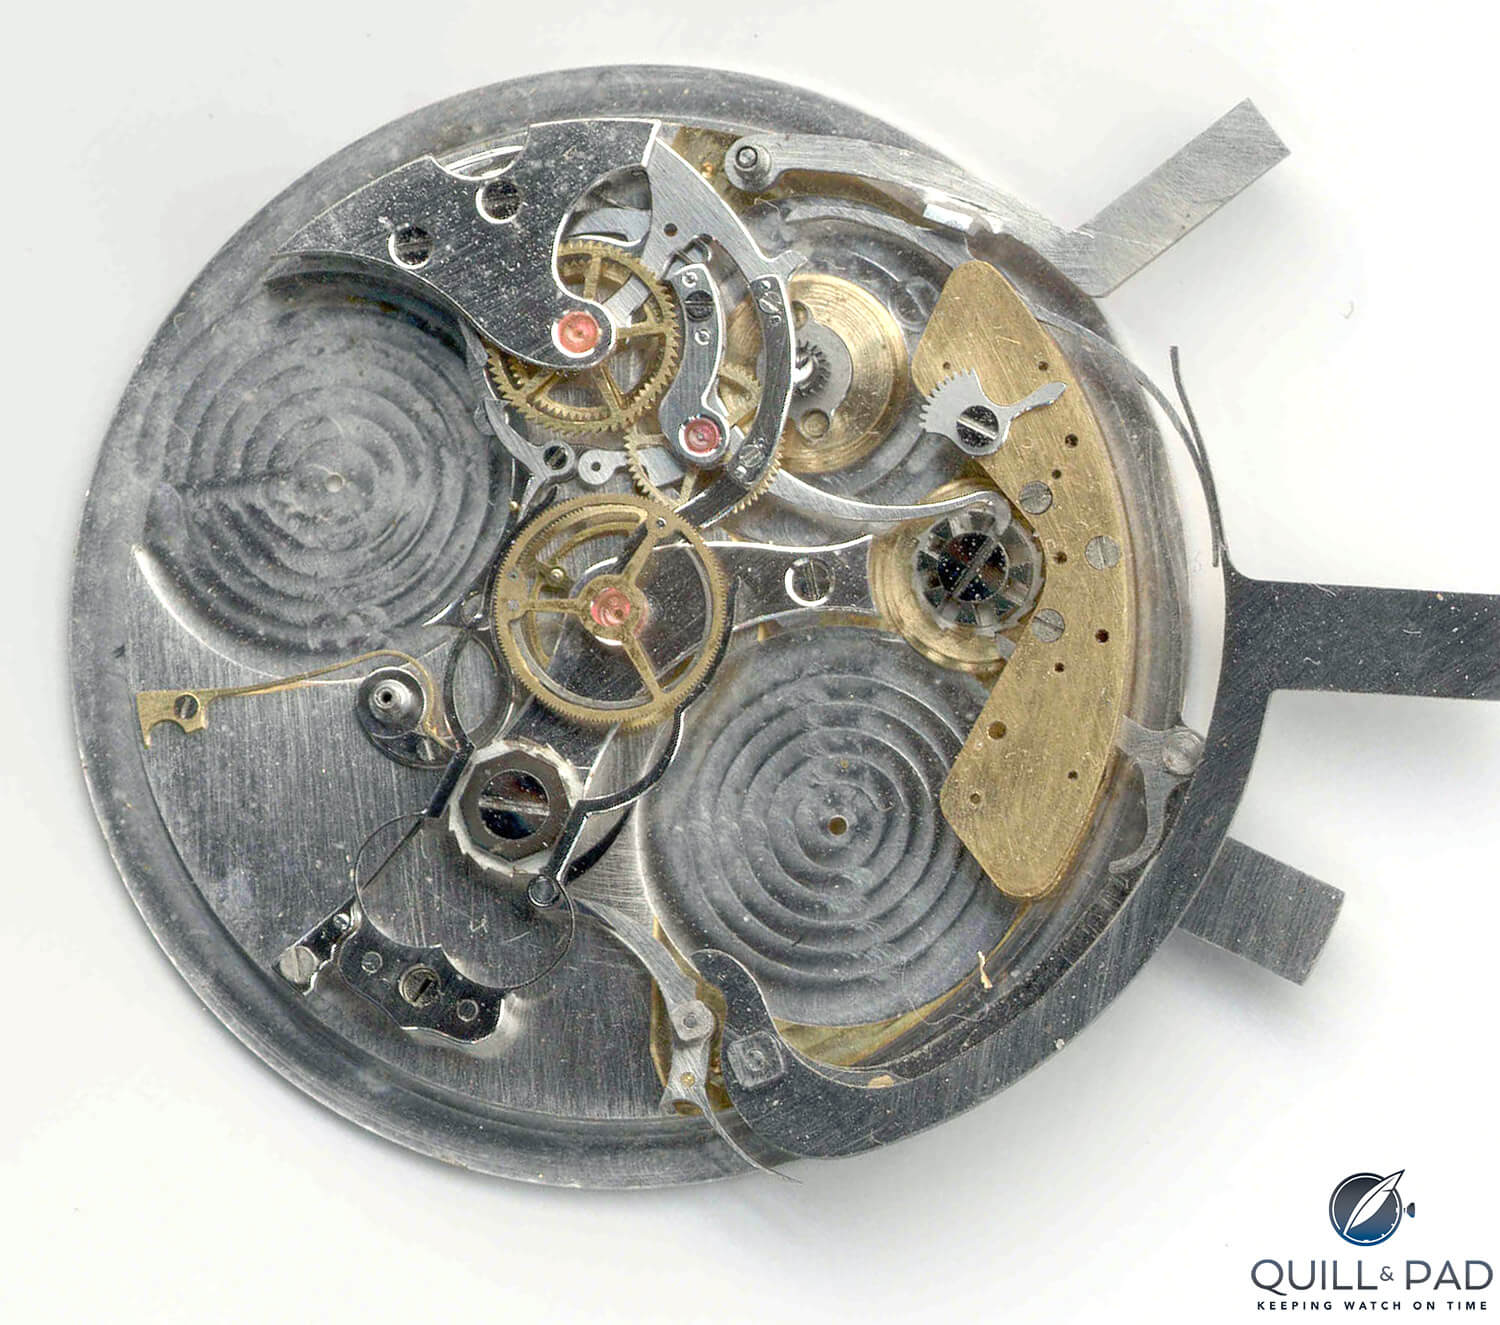 Paul Gerber created dummy plates to test that his design works properly before adding the chronograph to the irreplaceable Caliber 17